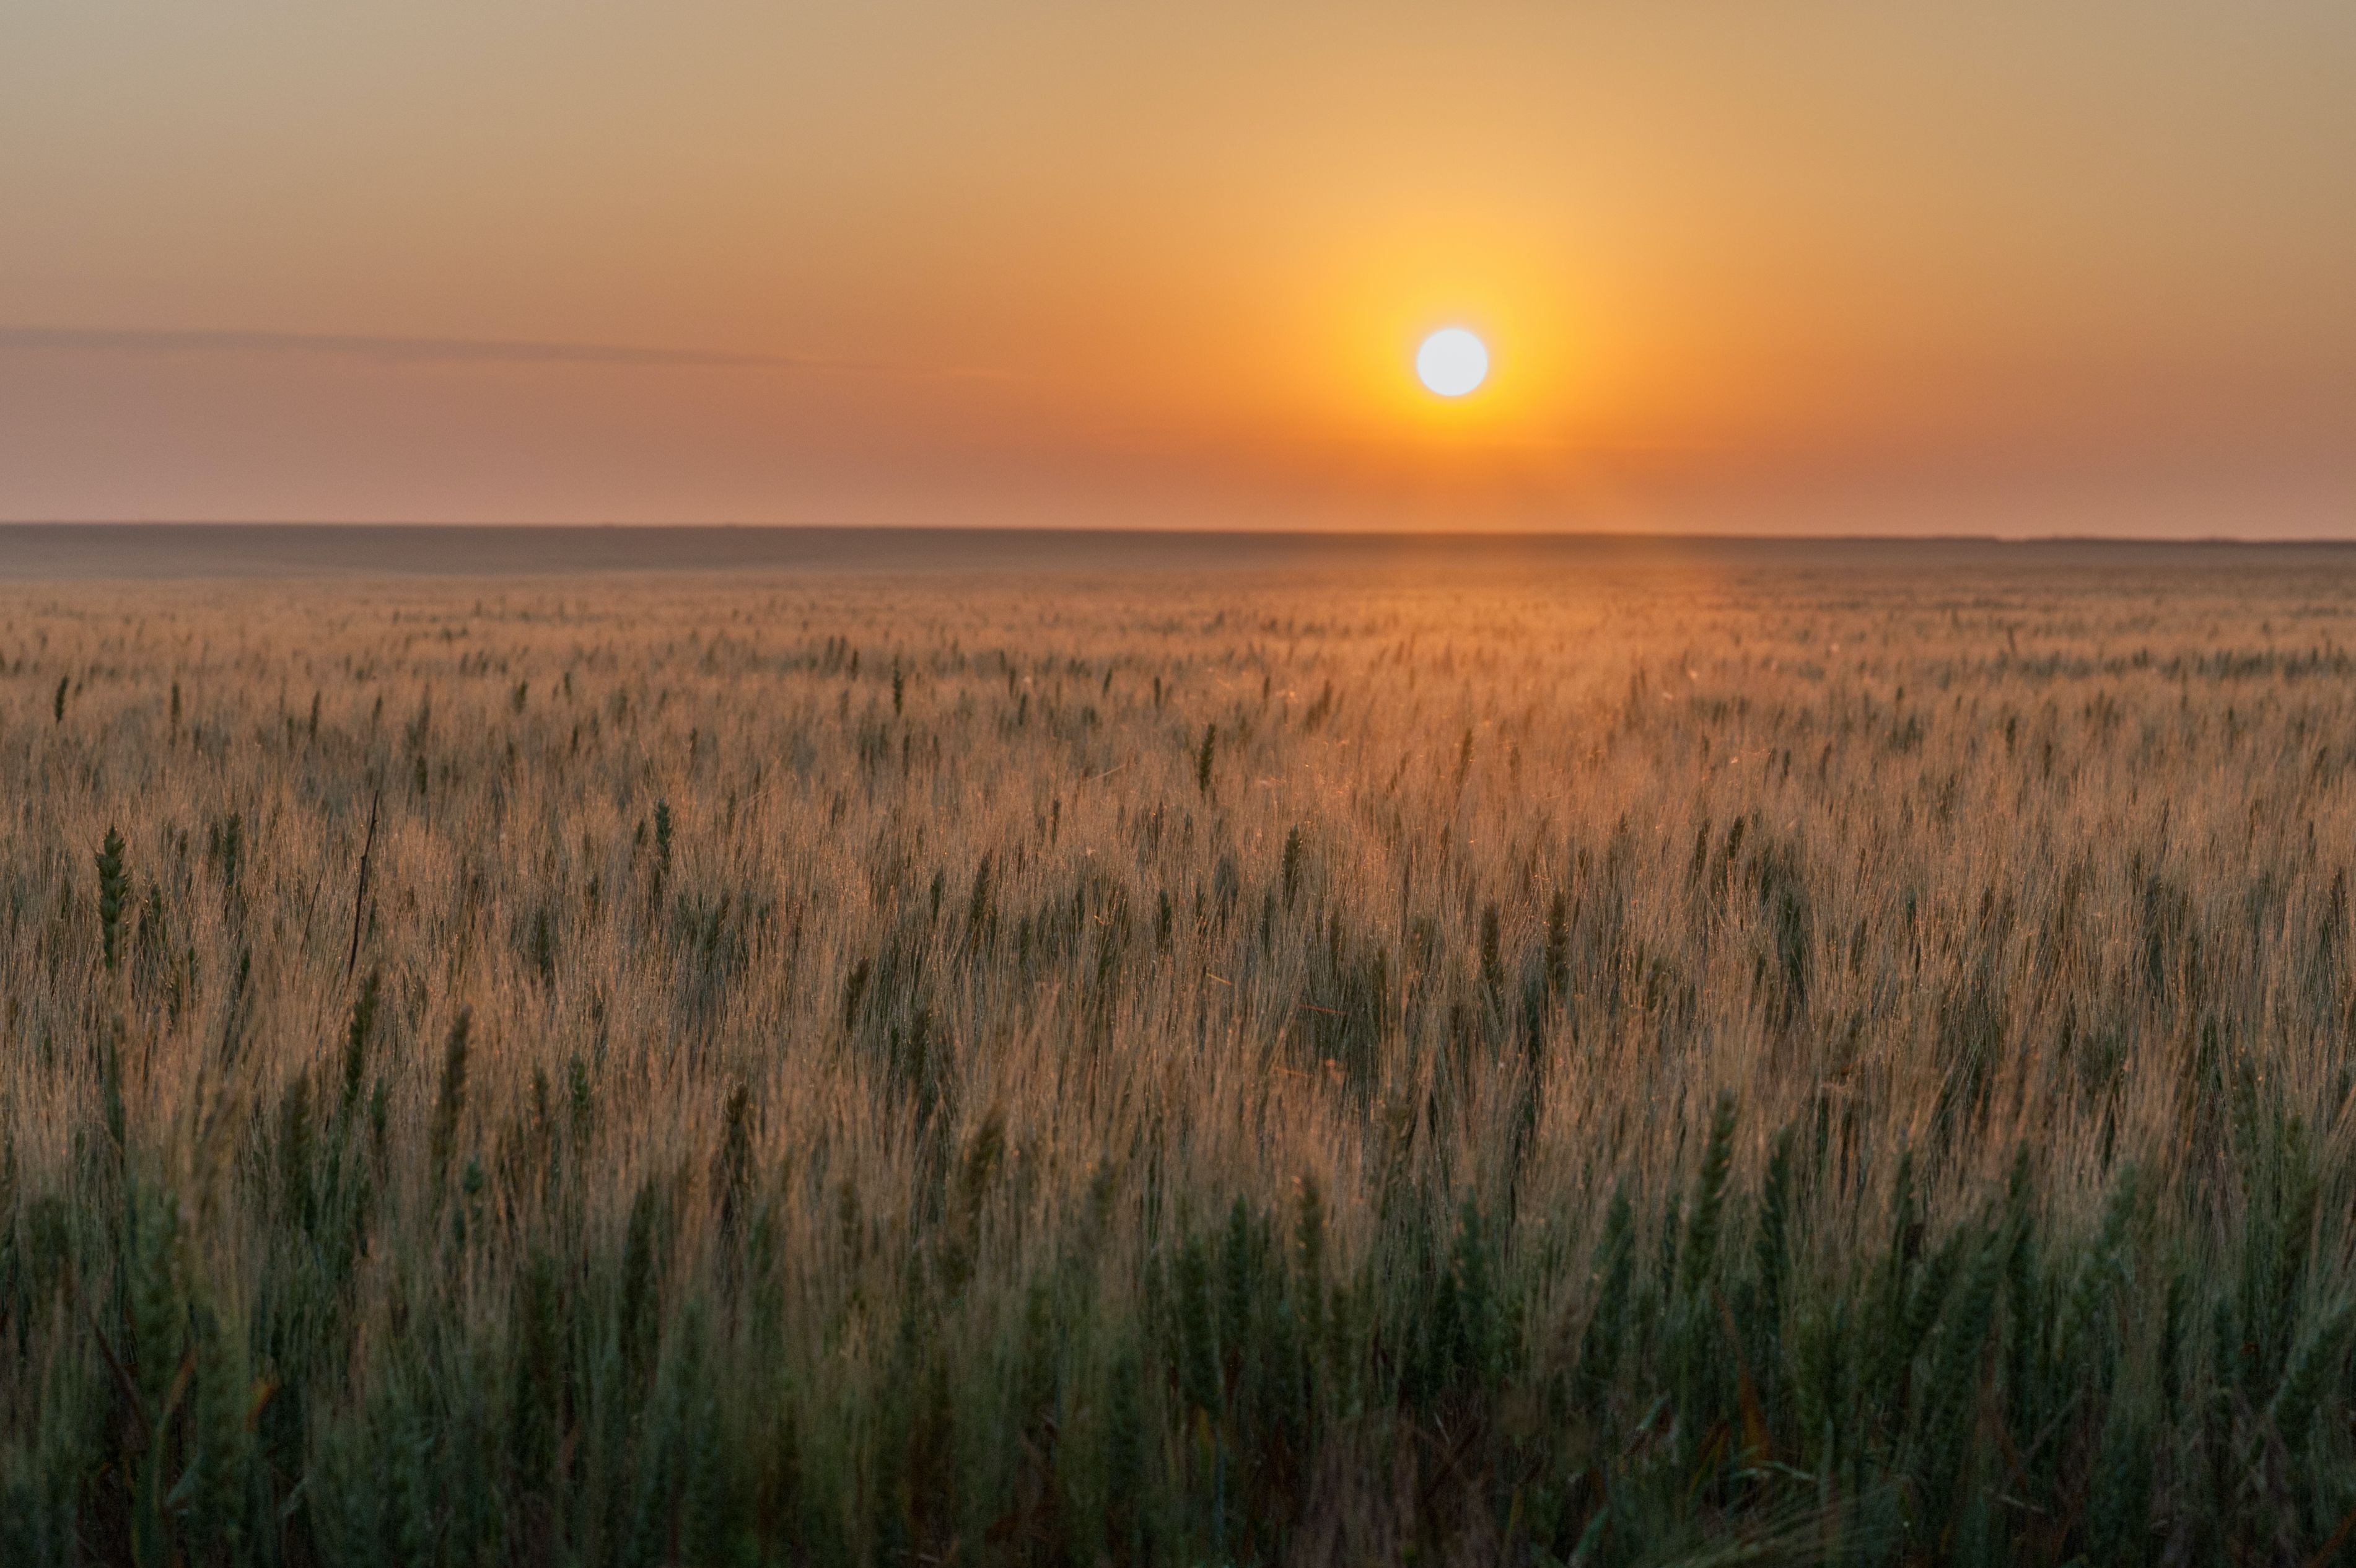 Wheat growing under sunset in the Great Plains region of the U.S.